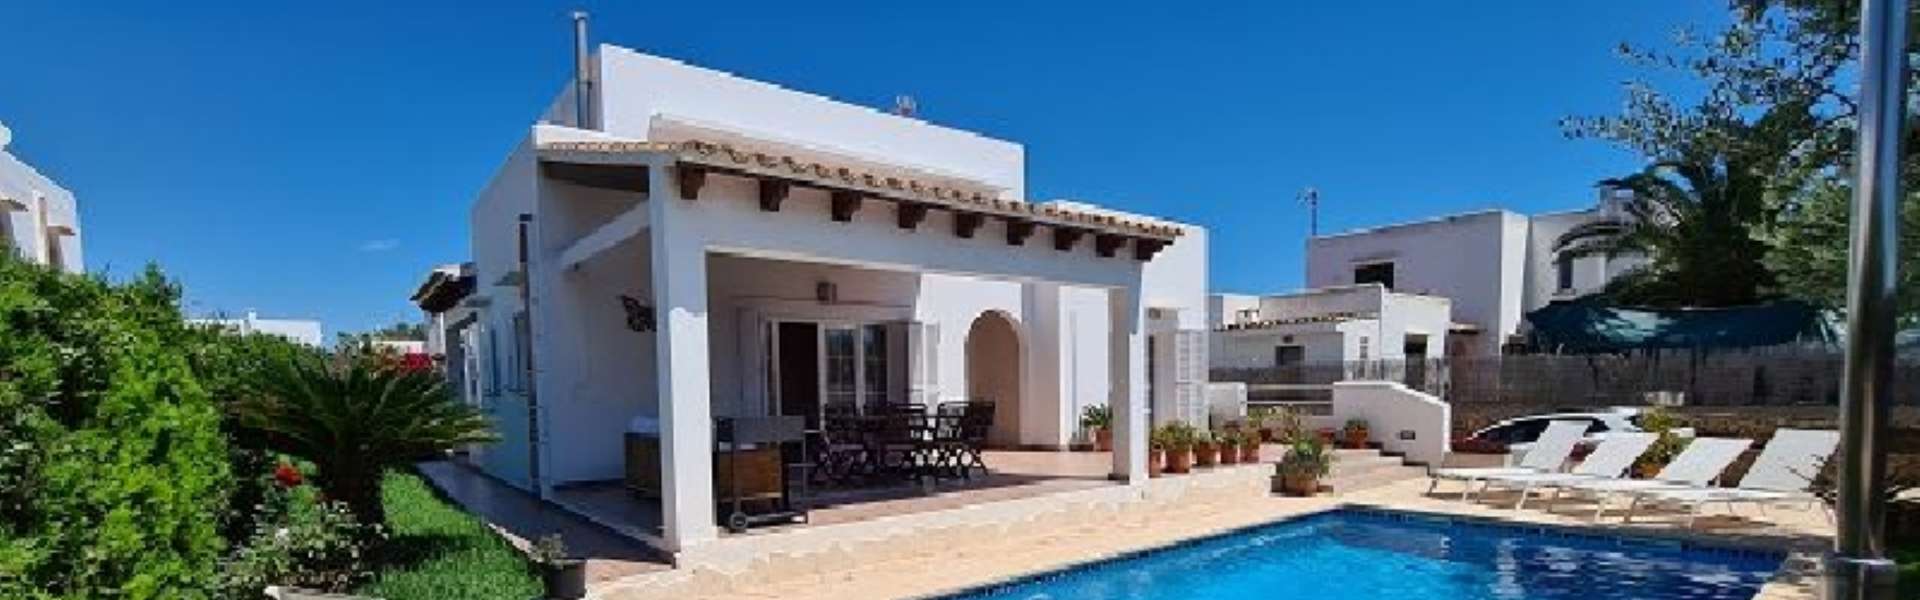 Cozy chalet for sale in Cala Ferrera/Cala d'Or